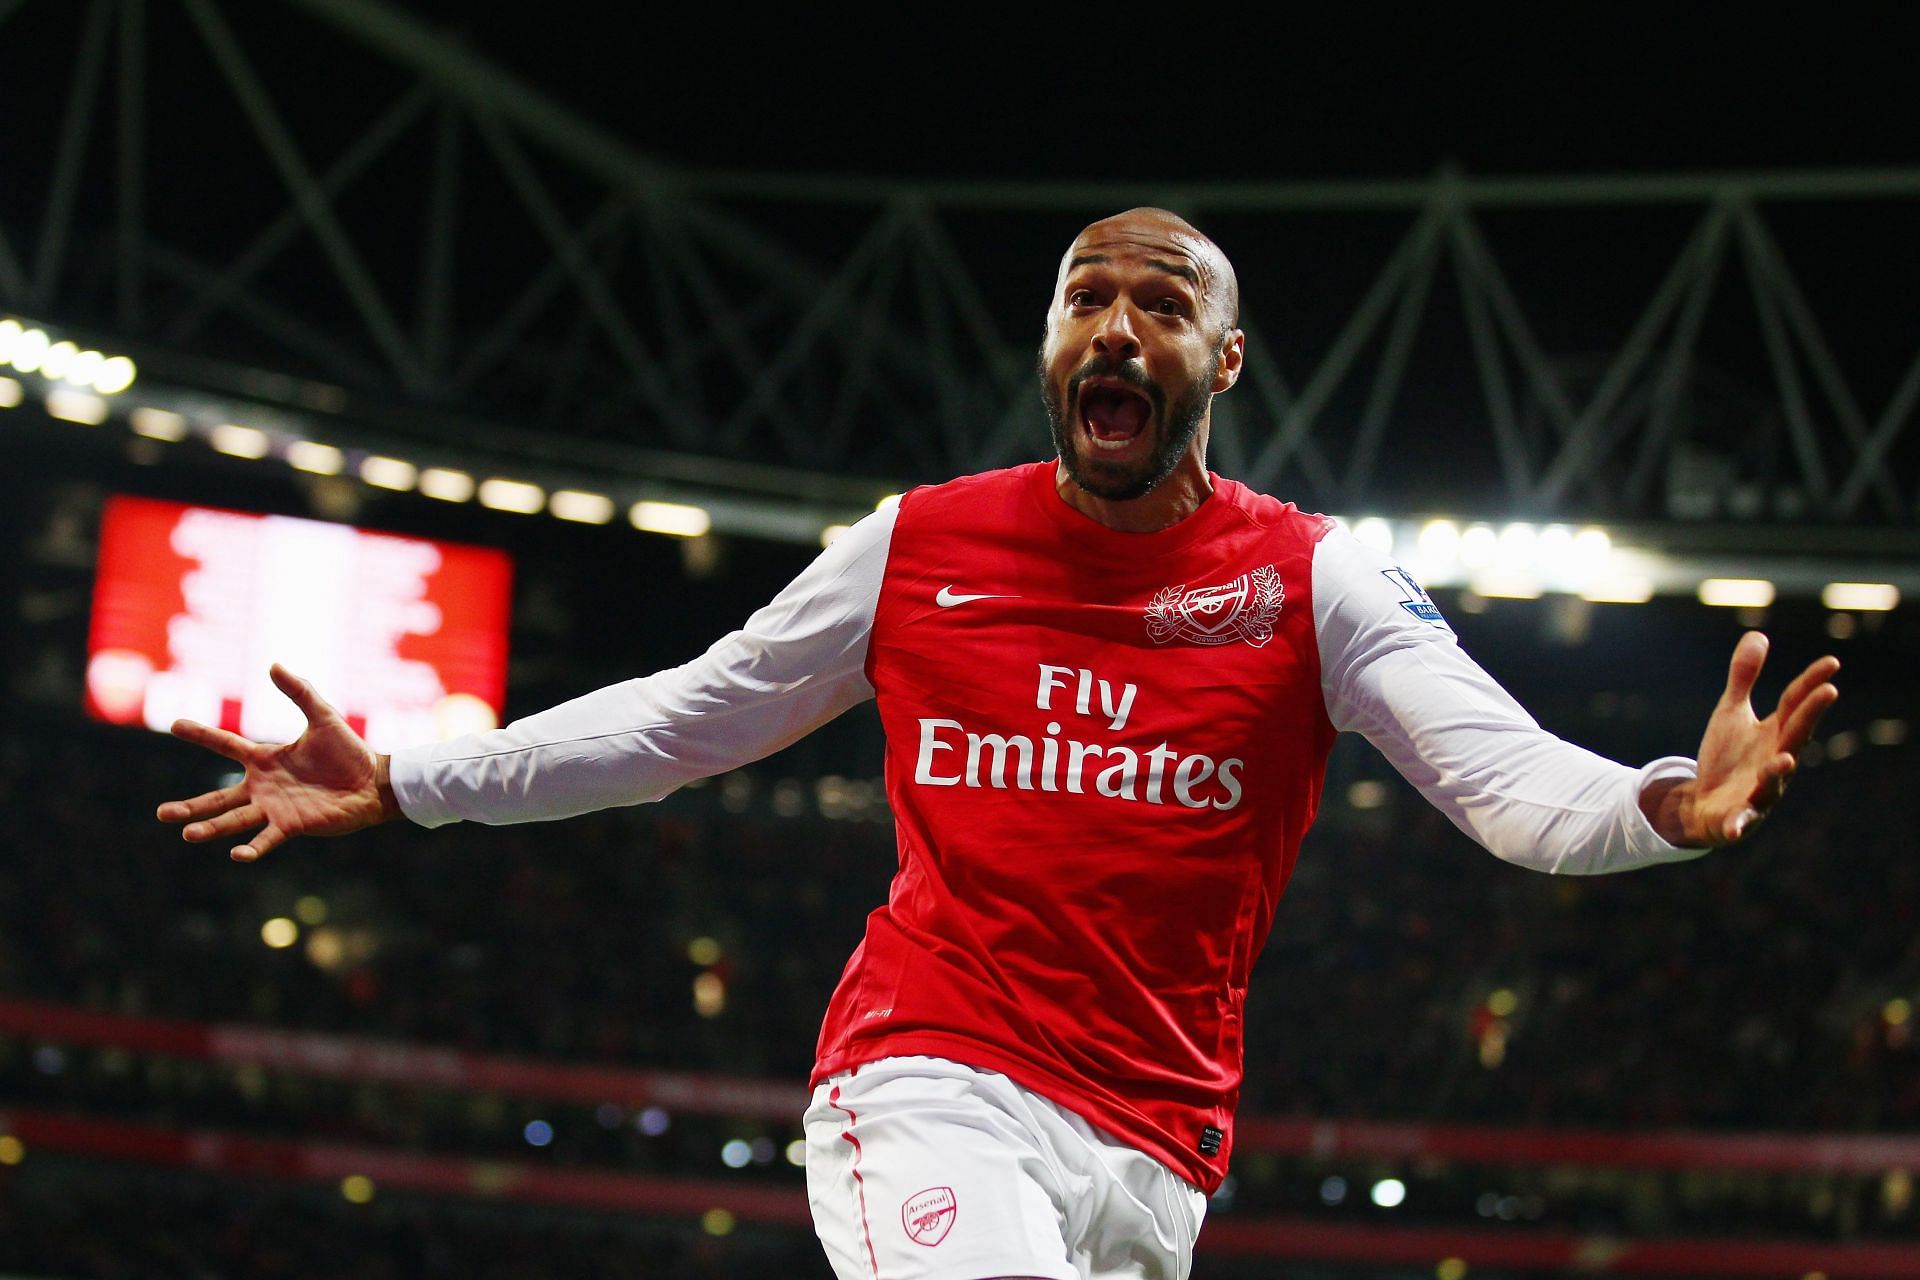 Thierry Henry is a legend at Arsenal